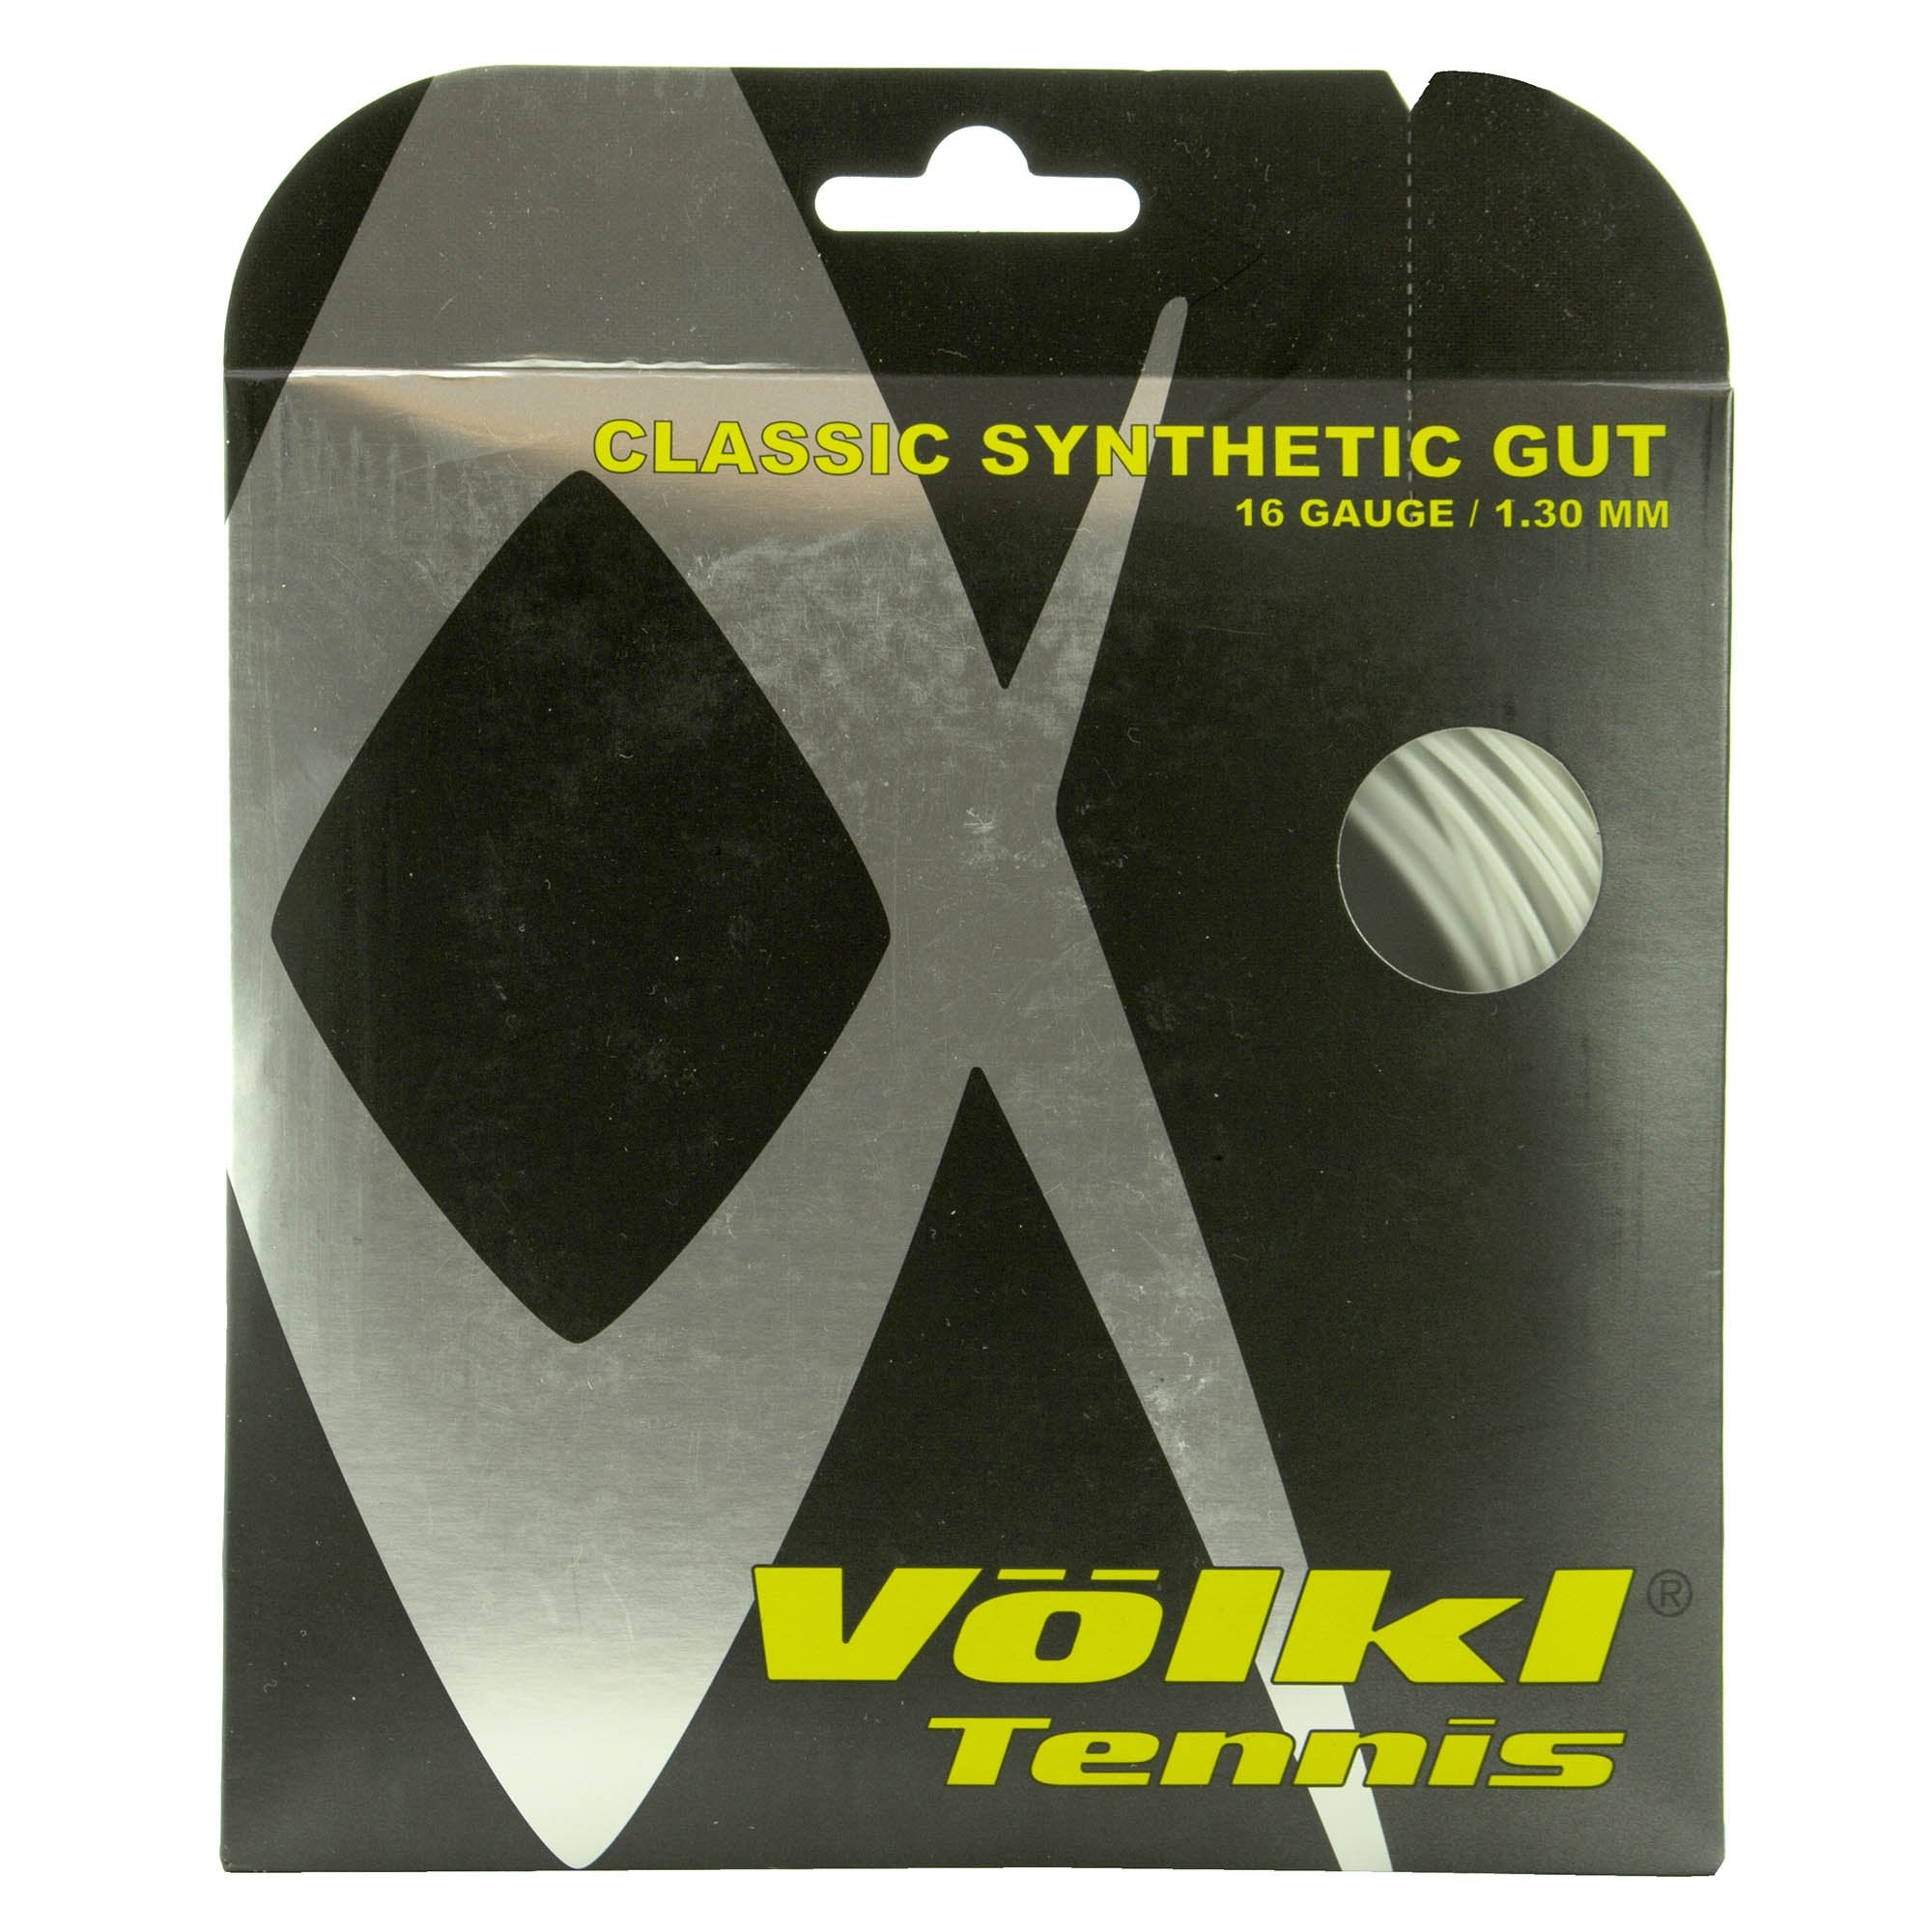 Volkl Classic Synthetic Gut Tennis String - 12M Set - White, 1.30mm